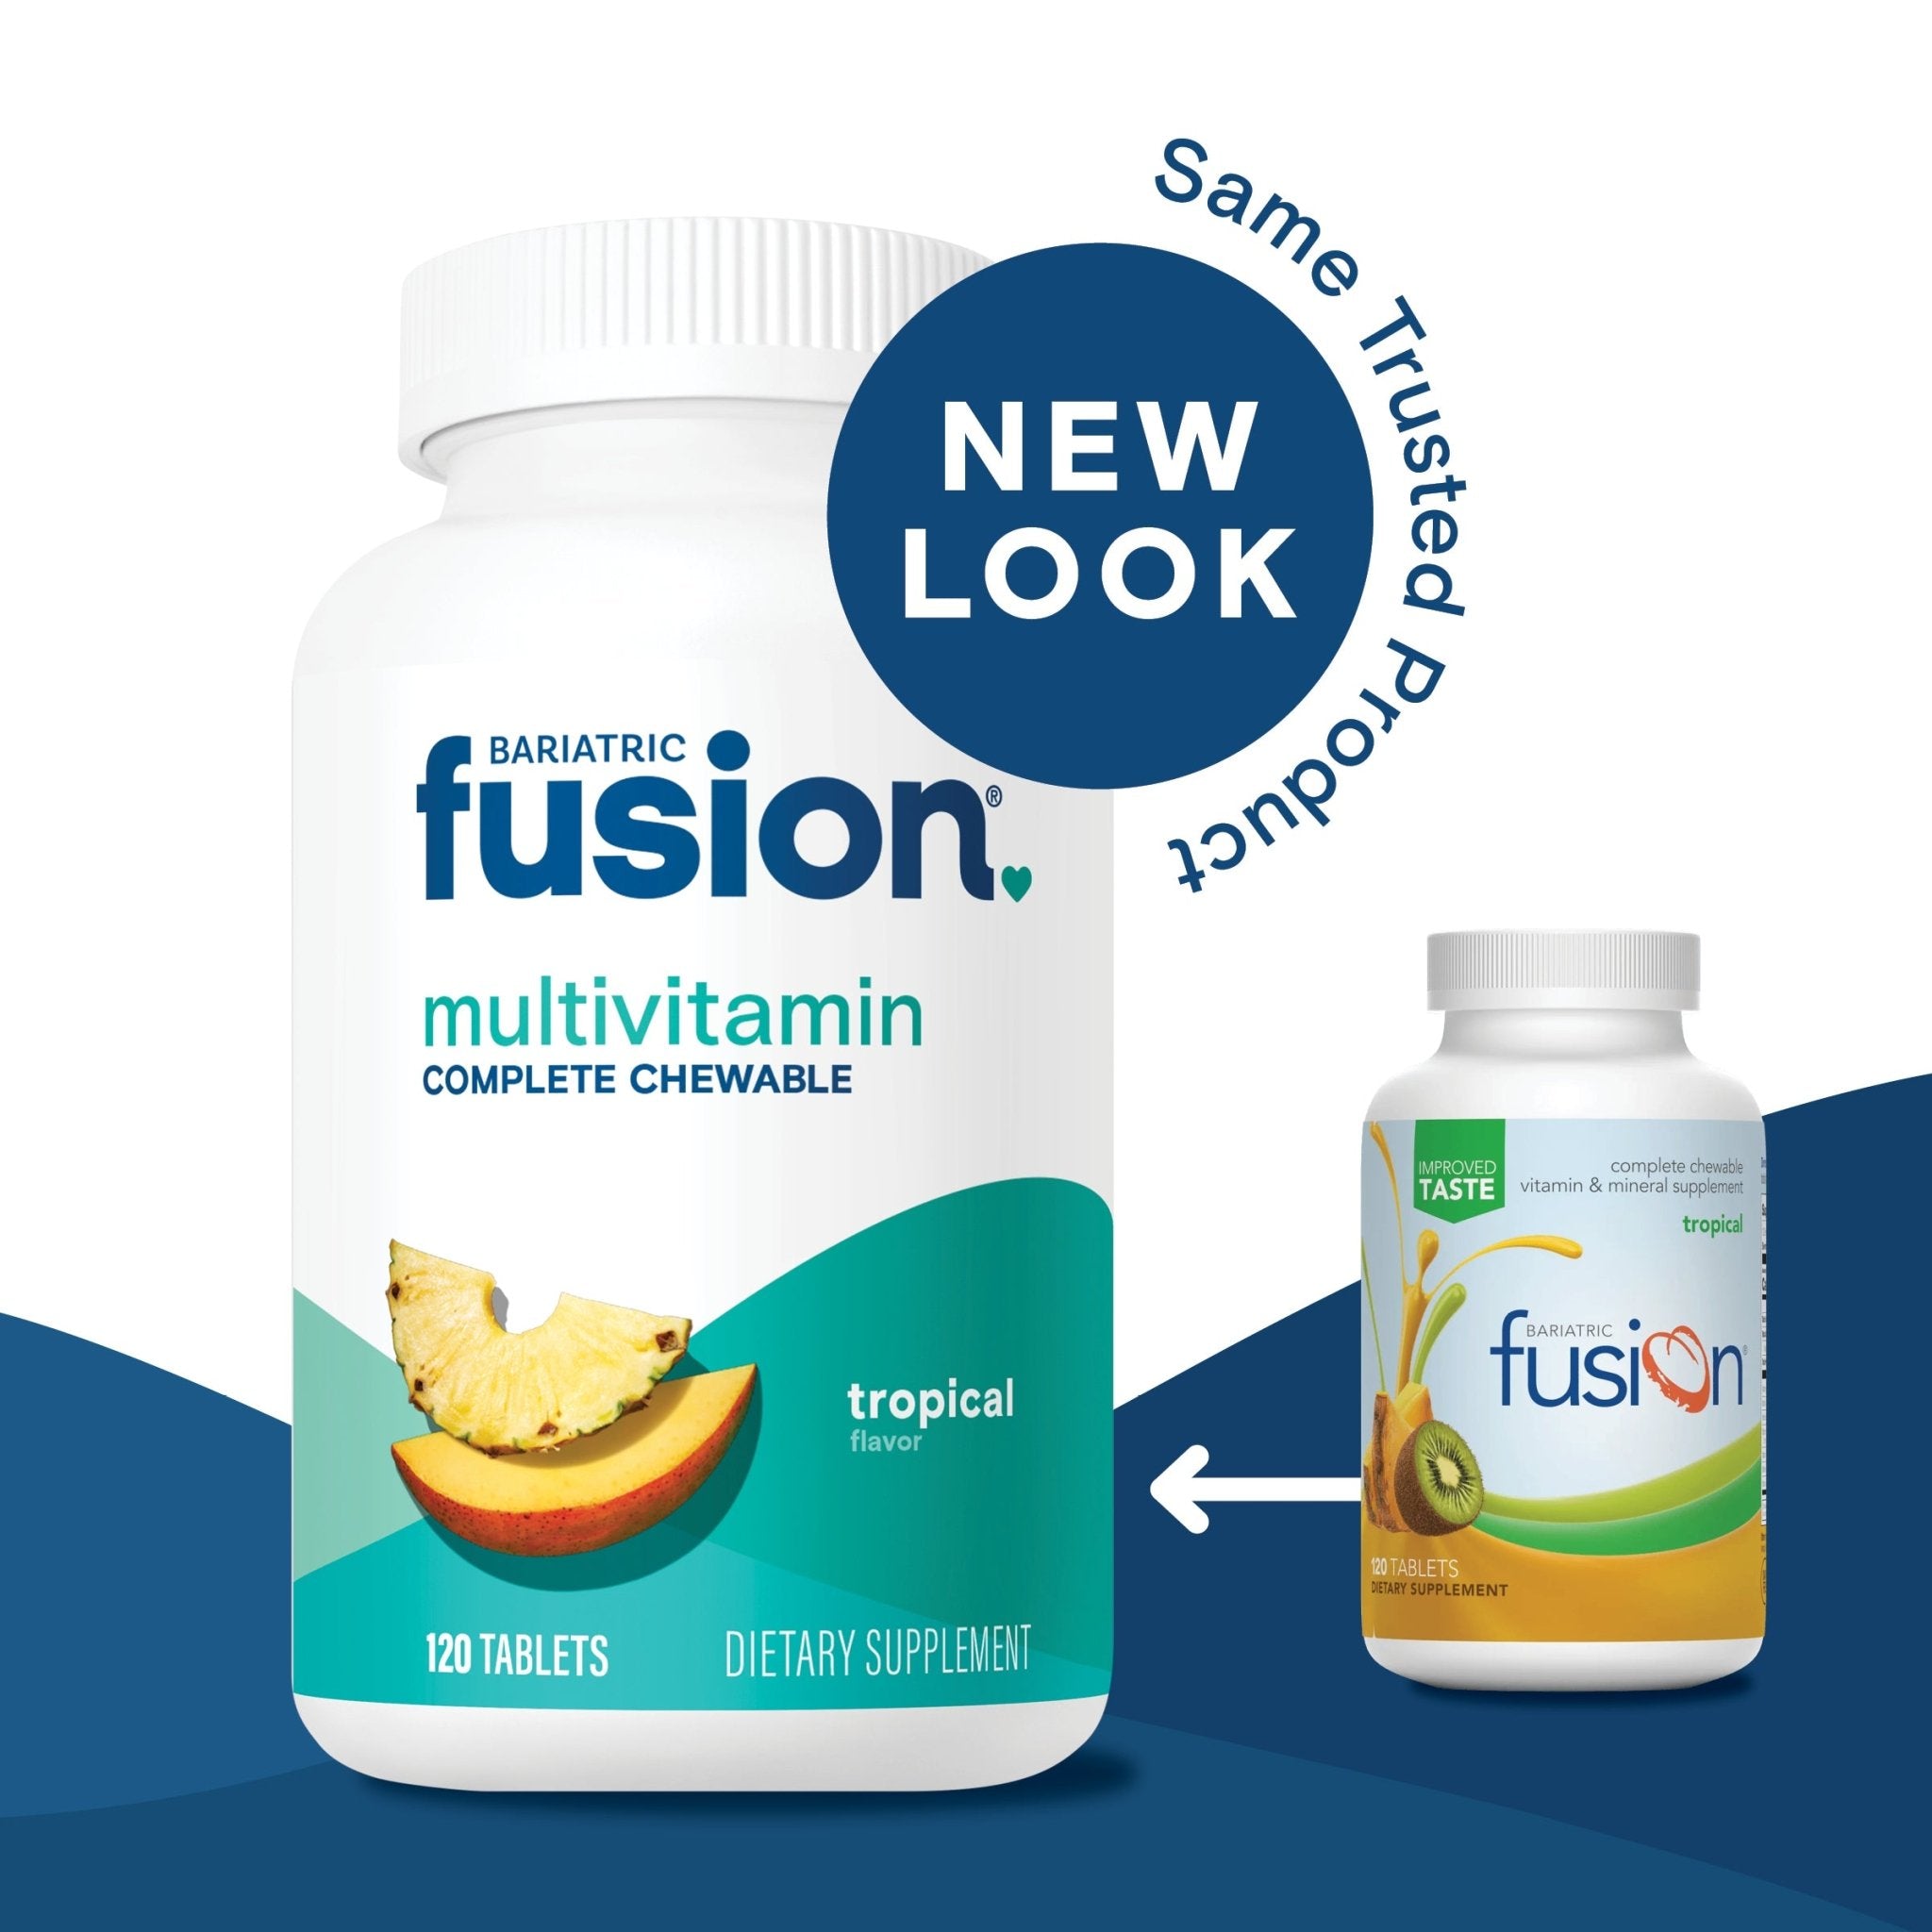 Tropical Complete Chewable Bariatric Multivitamin new look, same trusted product.